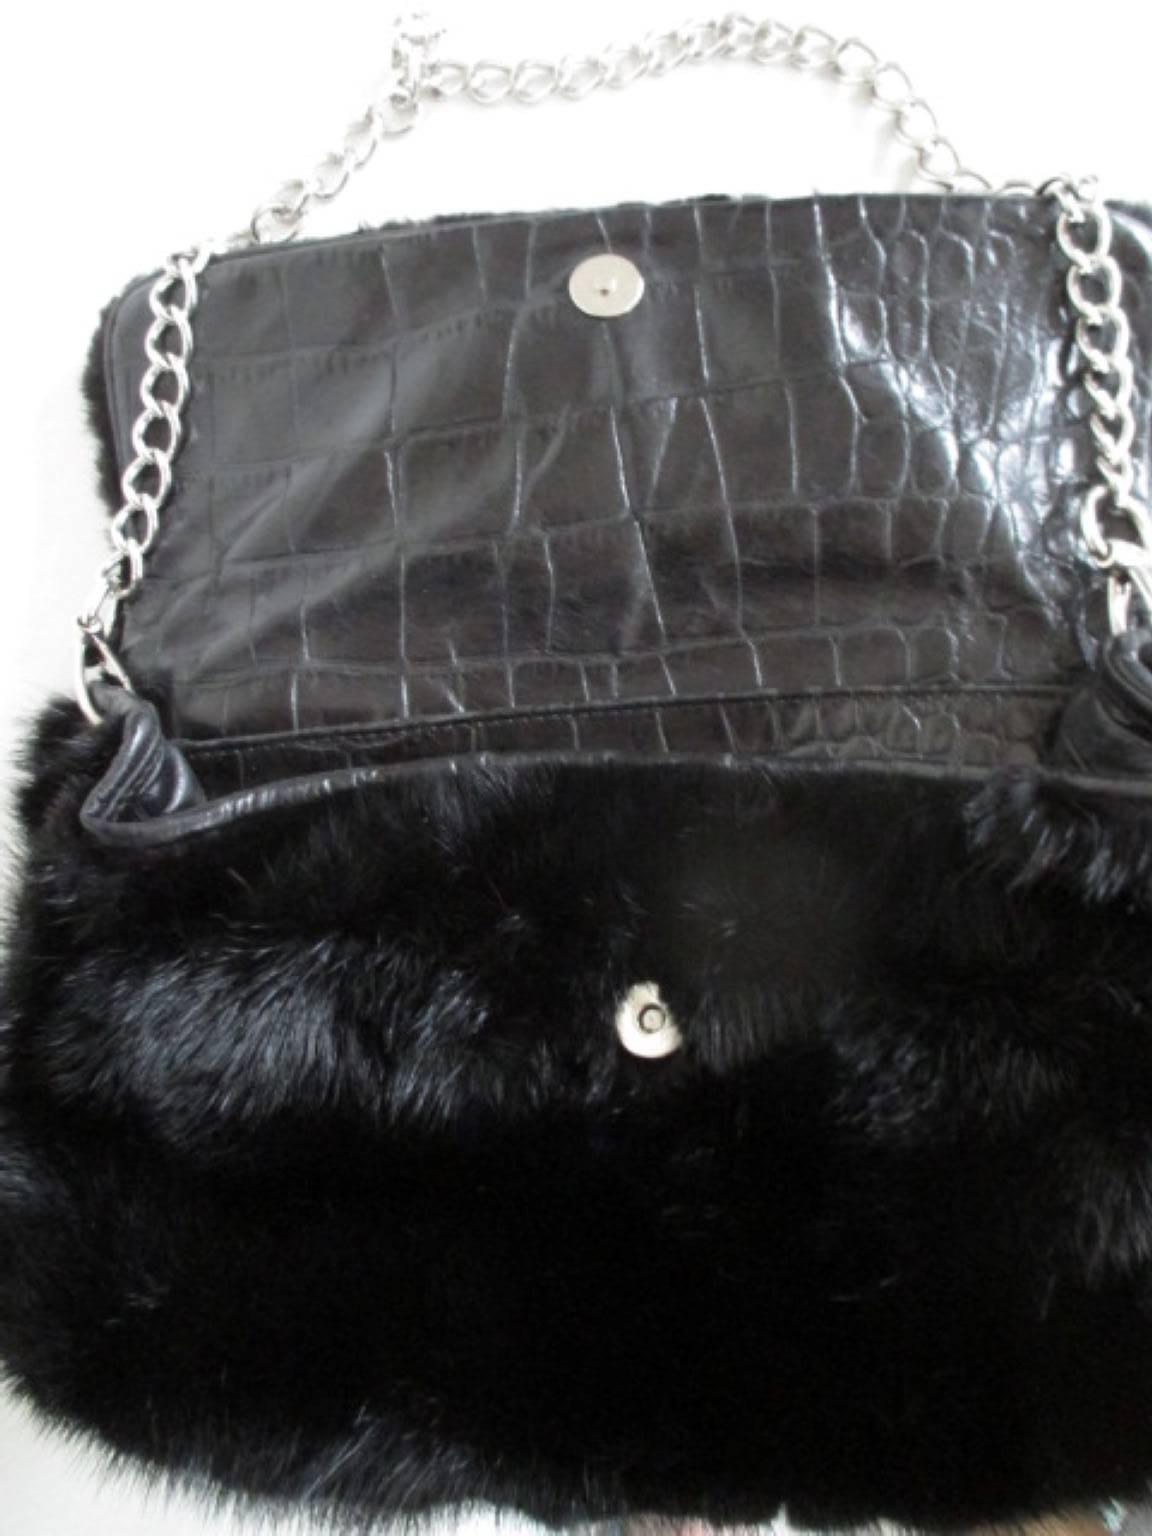 This black mink bag has silver hardware with a suède lining and crocodile print leather.
Its in very good condition, made in Italy by Buti.
Can be worn without the chain and use as a clutch.
measurements:
31 cm x 22 cm
